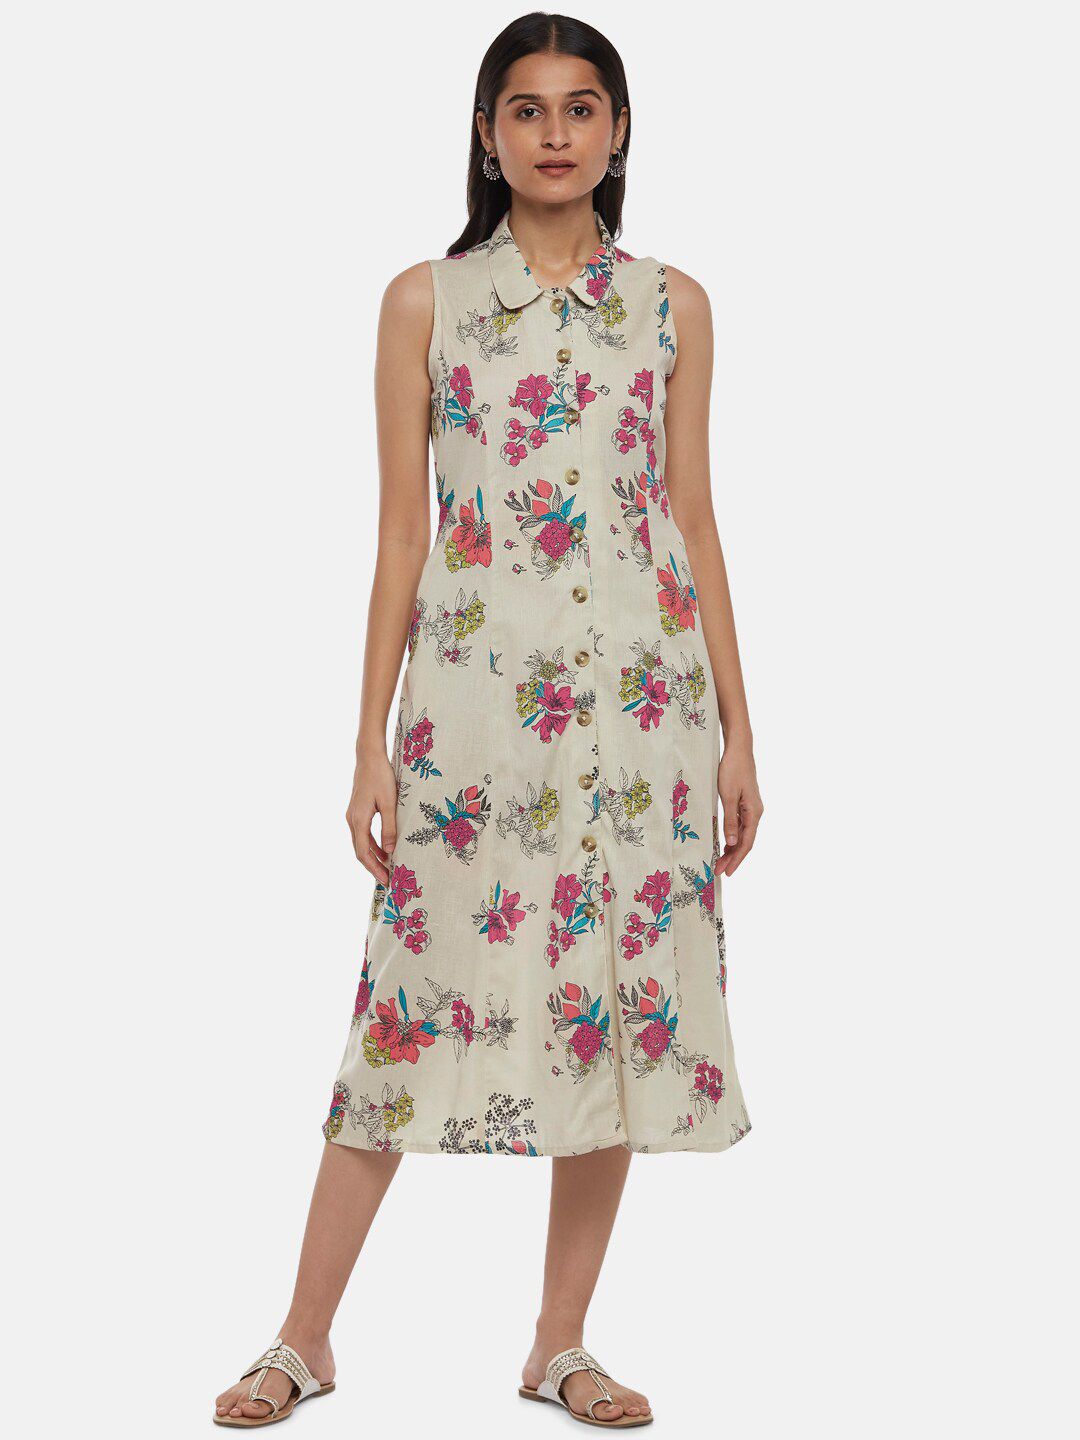 AKKRITI BY PANTALOONS Off White & hushed violet Floral A-Line Midi Dress Price in India